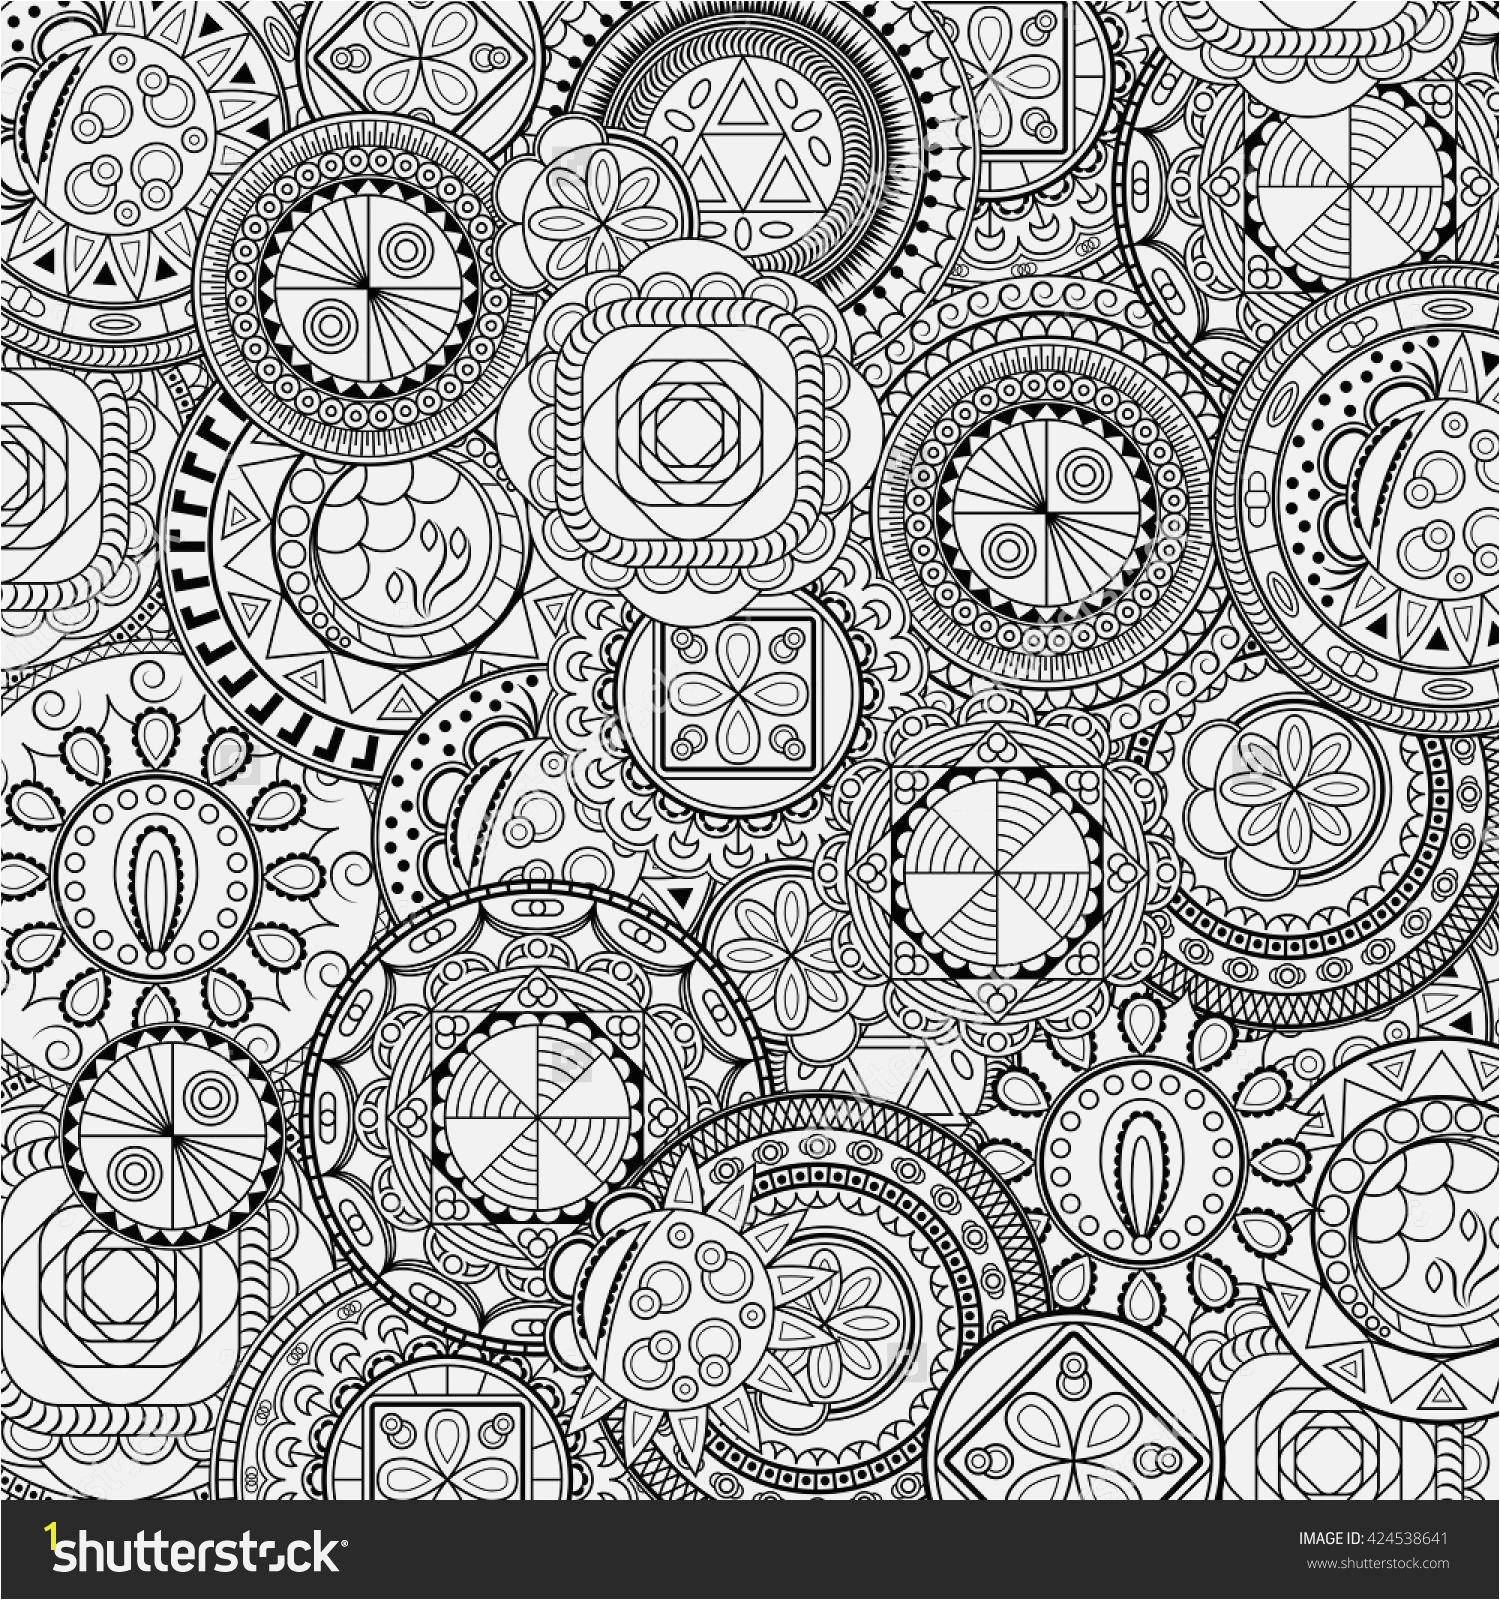 Stress Relief Coloring Books Free Download Full Size Coloring Book Stress Relieving Patterns Unique Coloring 20